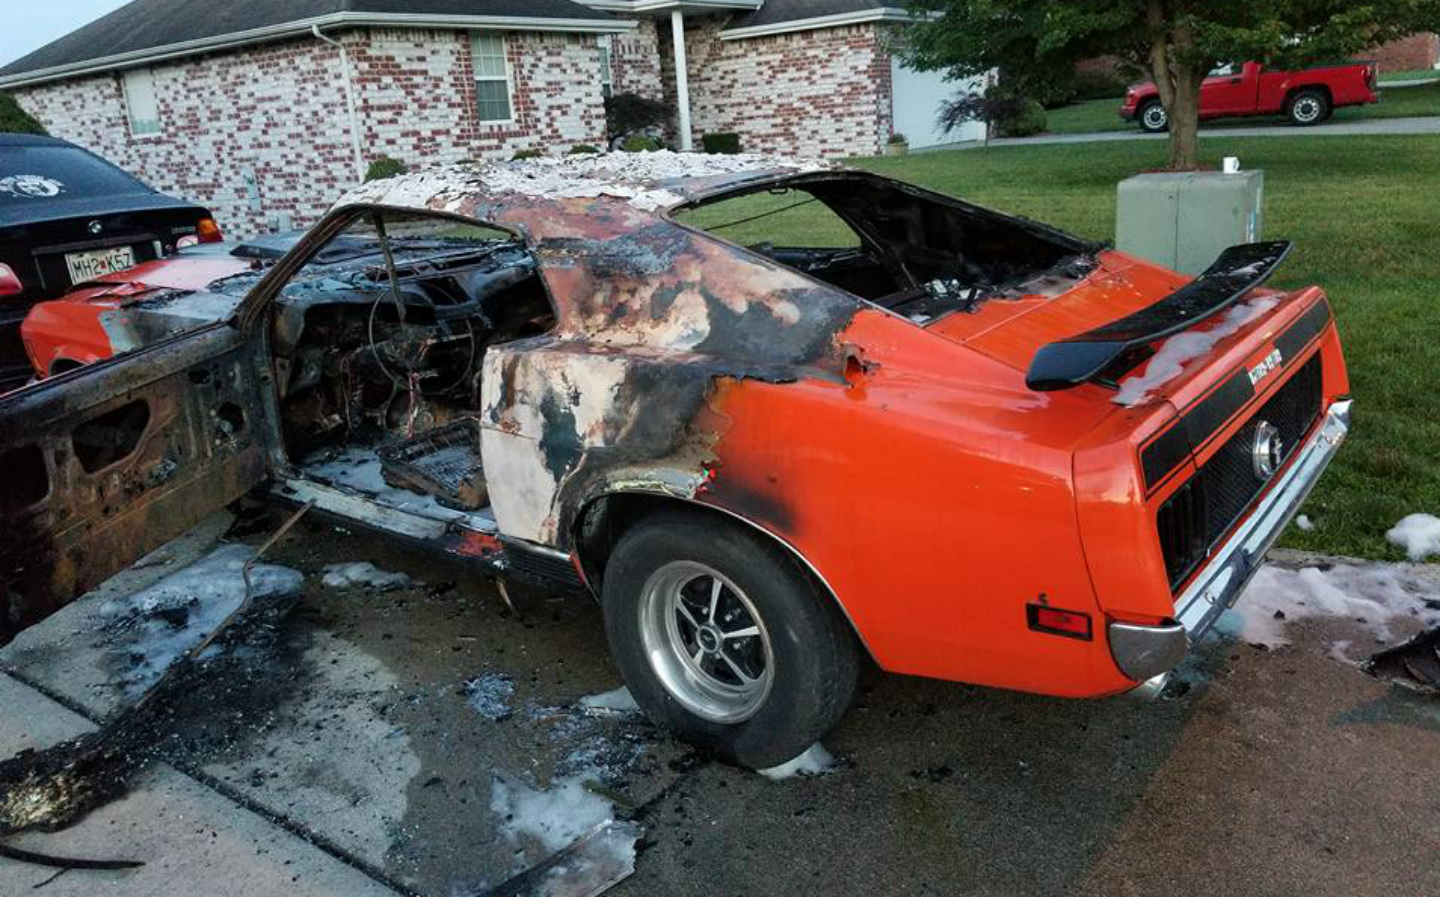 Crowd-funding raises nearly £10,000 after vandals burn classic Ford Mustang to the ground